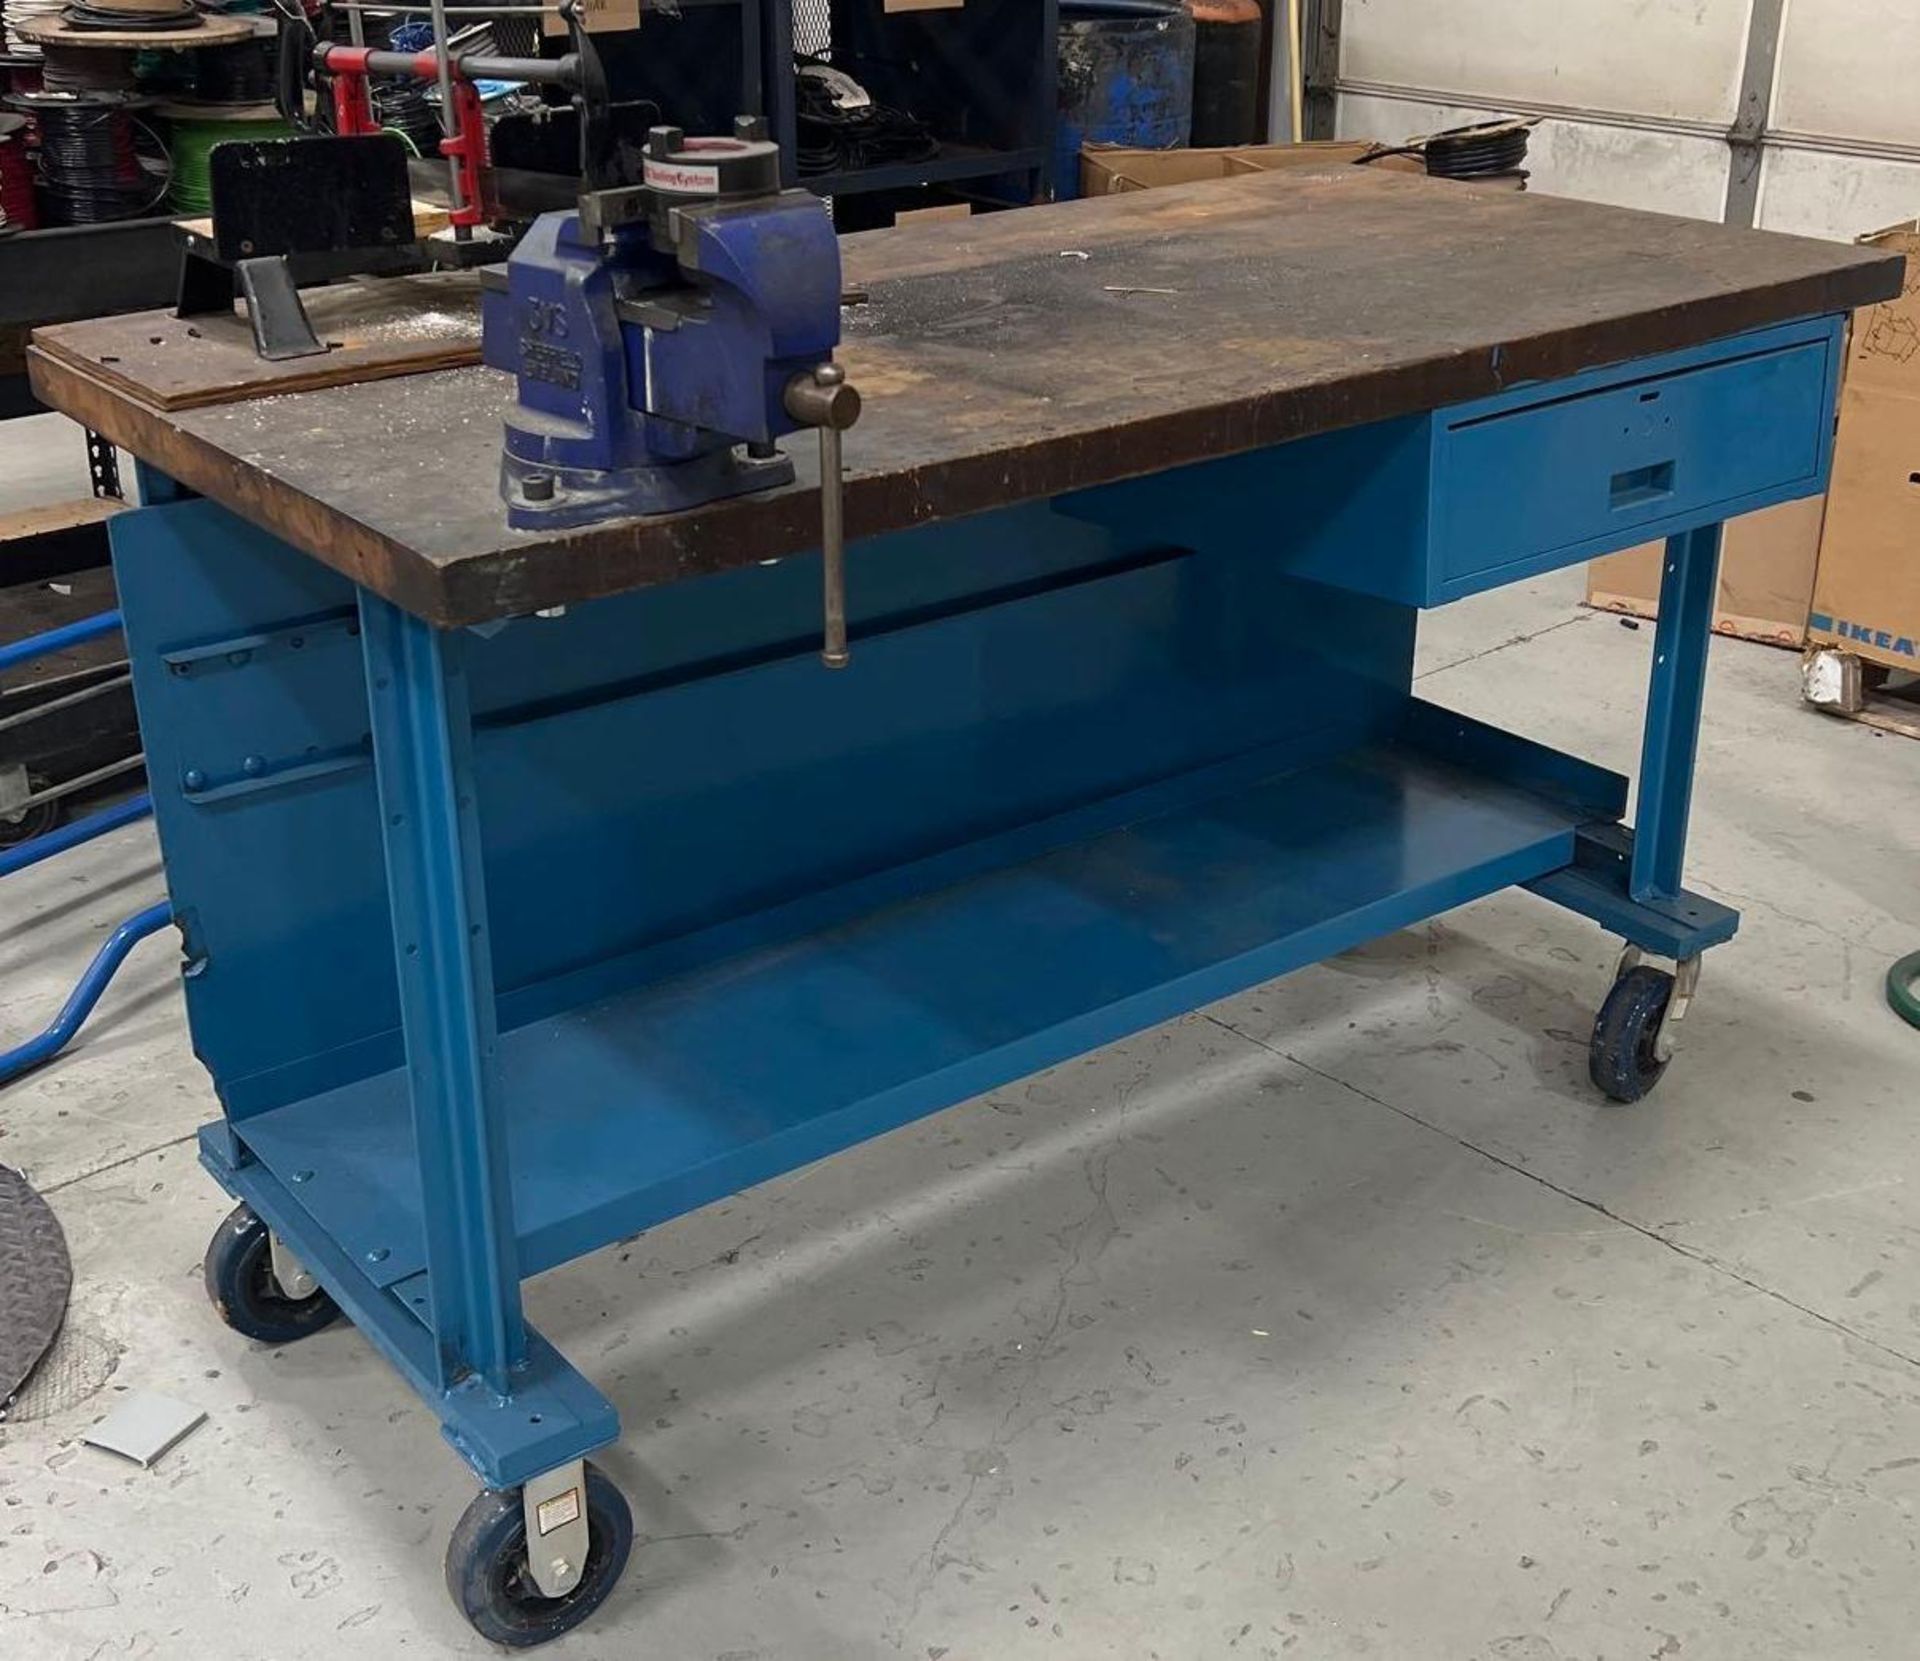 Work Desk on Wheels with Vise and Saw